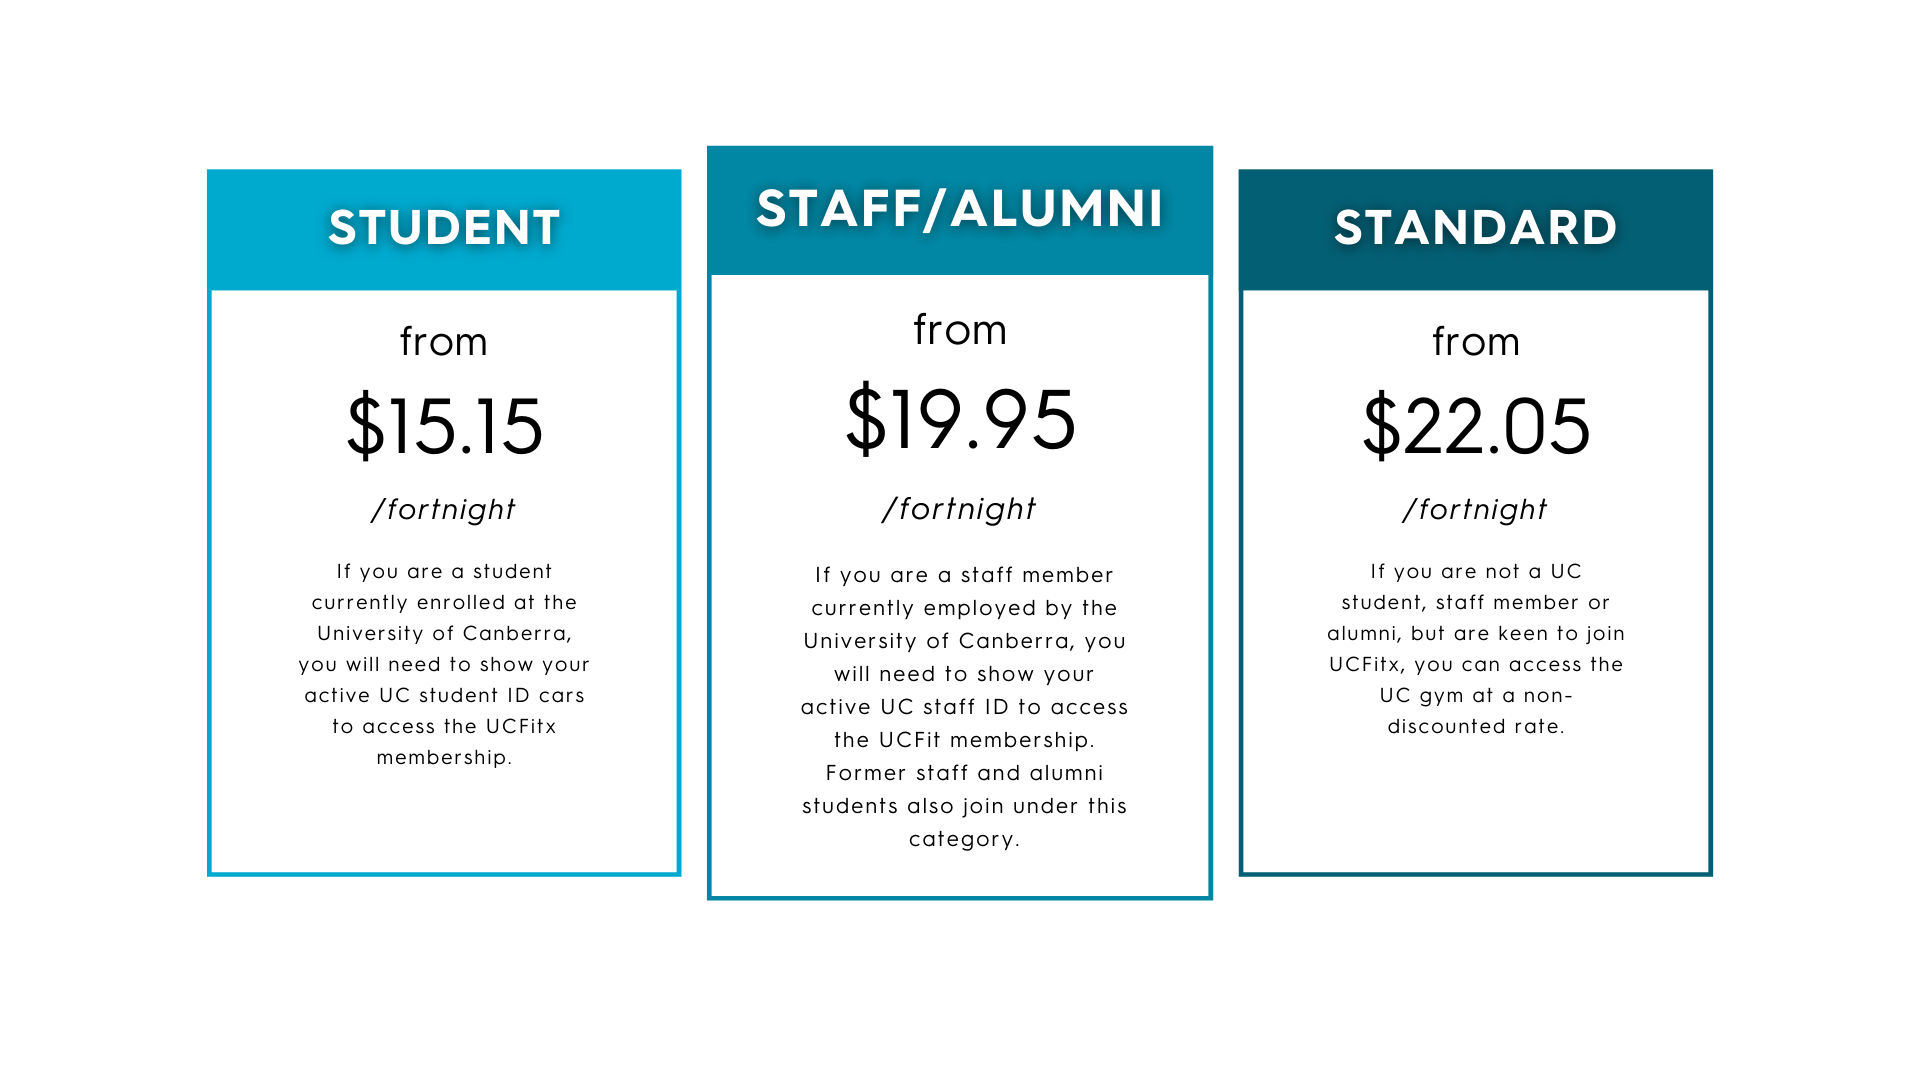 A graphic demonstrating the three membership types available at UCFitX. These are Standard, Student and Staff/Alumni.  Standard prices are from $20 per fortnight and available to members who are not University of Canberra Students, Staff or Alumni; Student pricing is from $14 per fortnight and available to currently enrolled University of Canberra Students that can show a current student card; Staff/Alumni pricing is from $18 per fortnight and available to staff currently employed at the University of Canberra and Alumni of the University of Canberra.